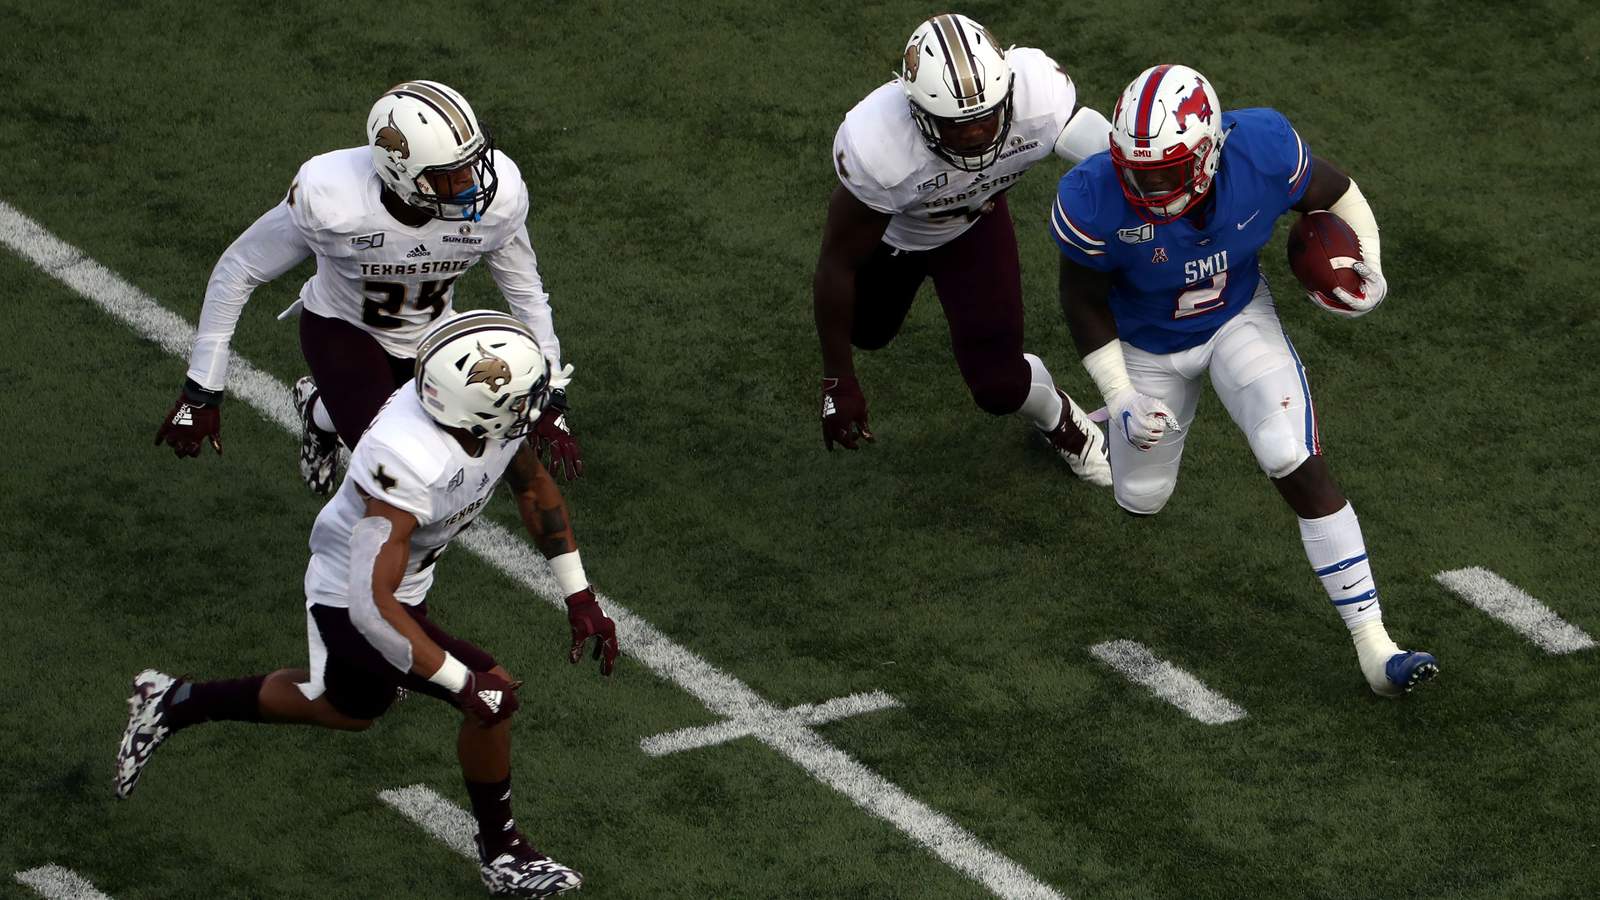 Texas State coach outlines possible return for college football, potential coronavirus testing for athletes